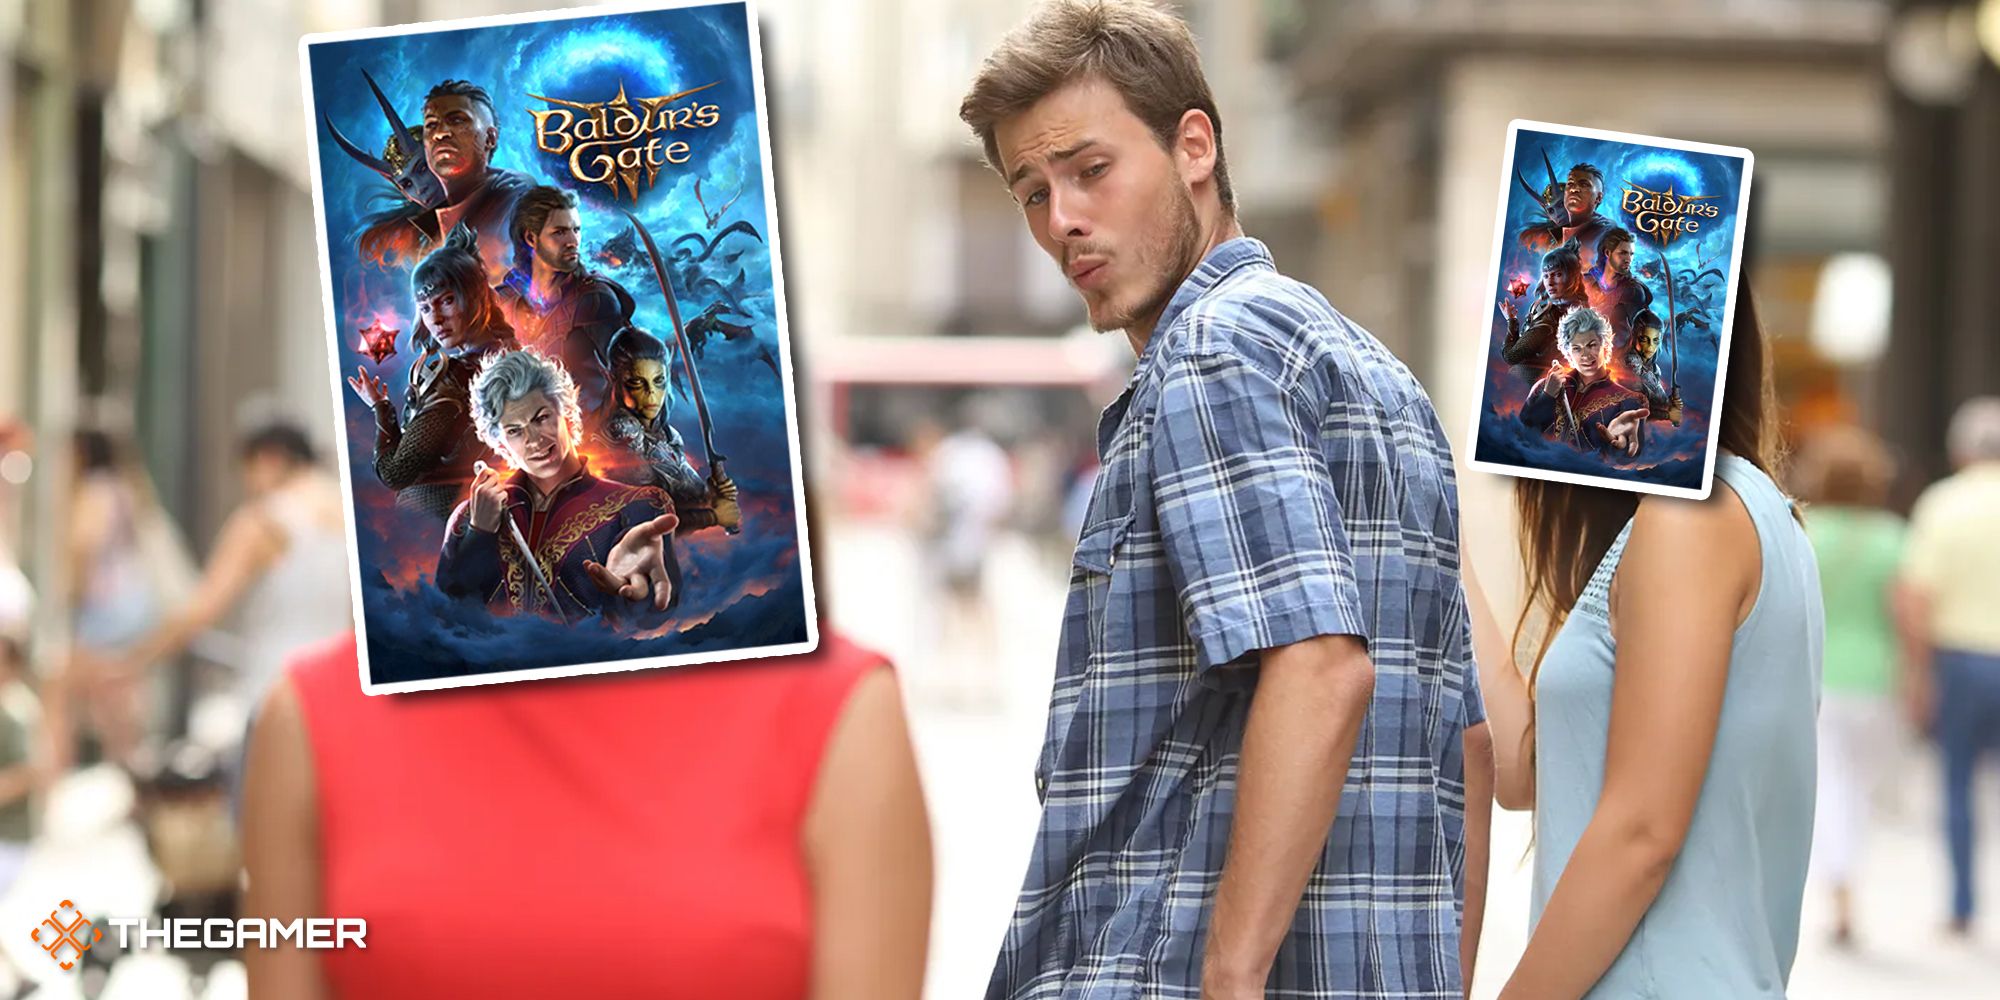 Distracted Boyfriend meme but both women's heads have been replaced with the cover art for Baldur's Gate 3